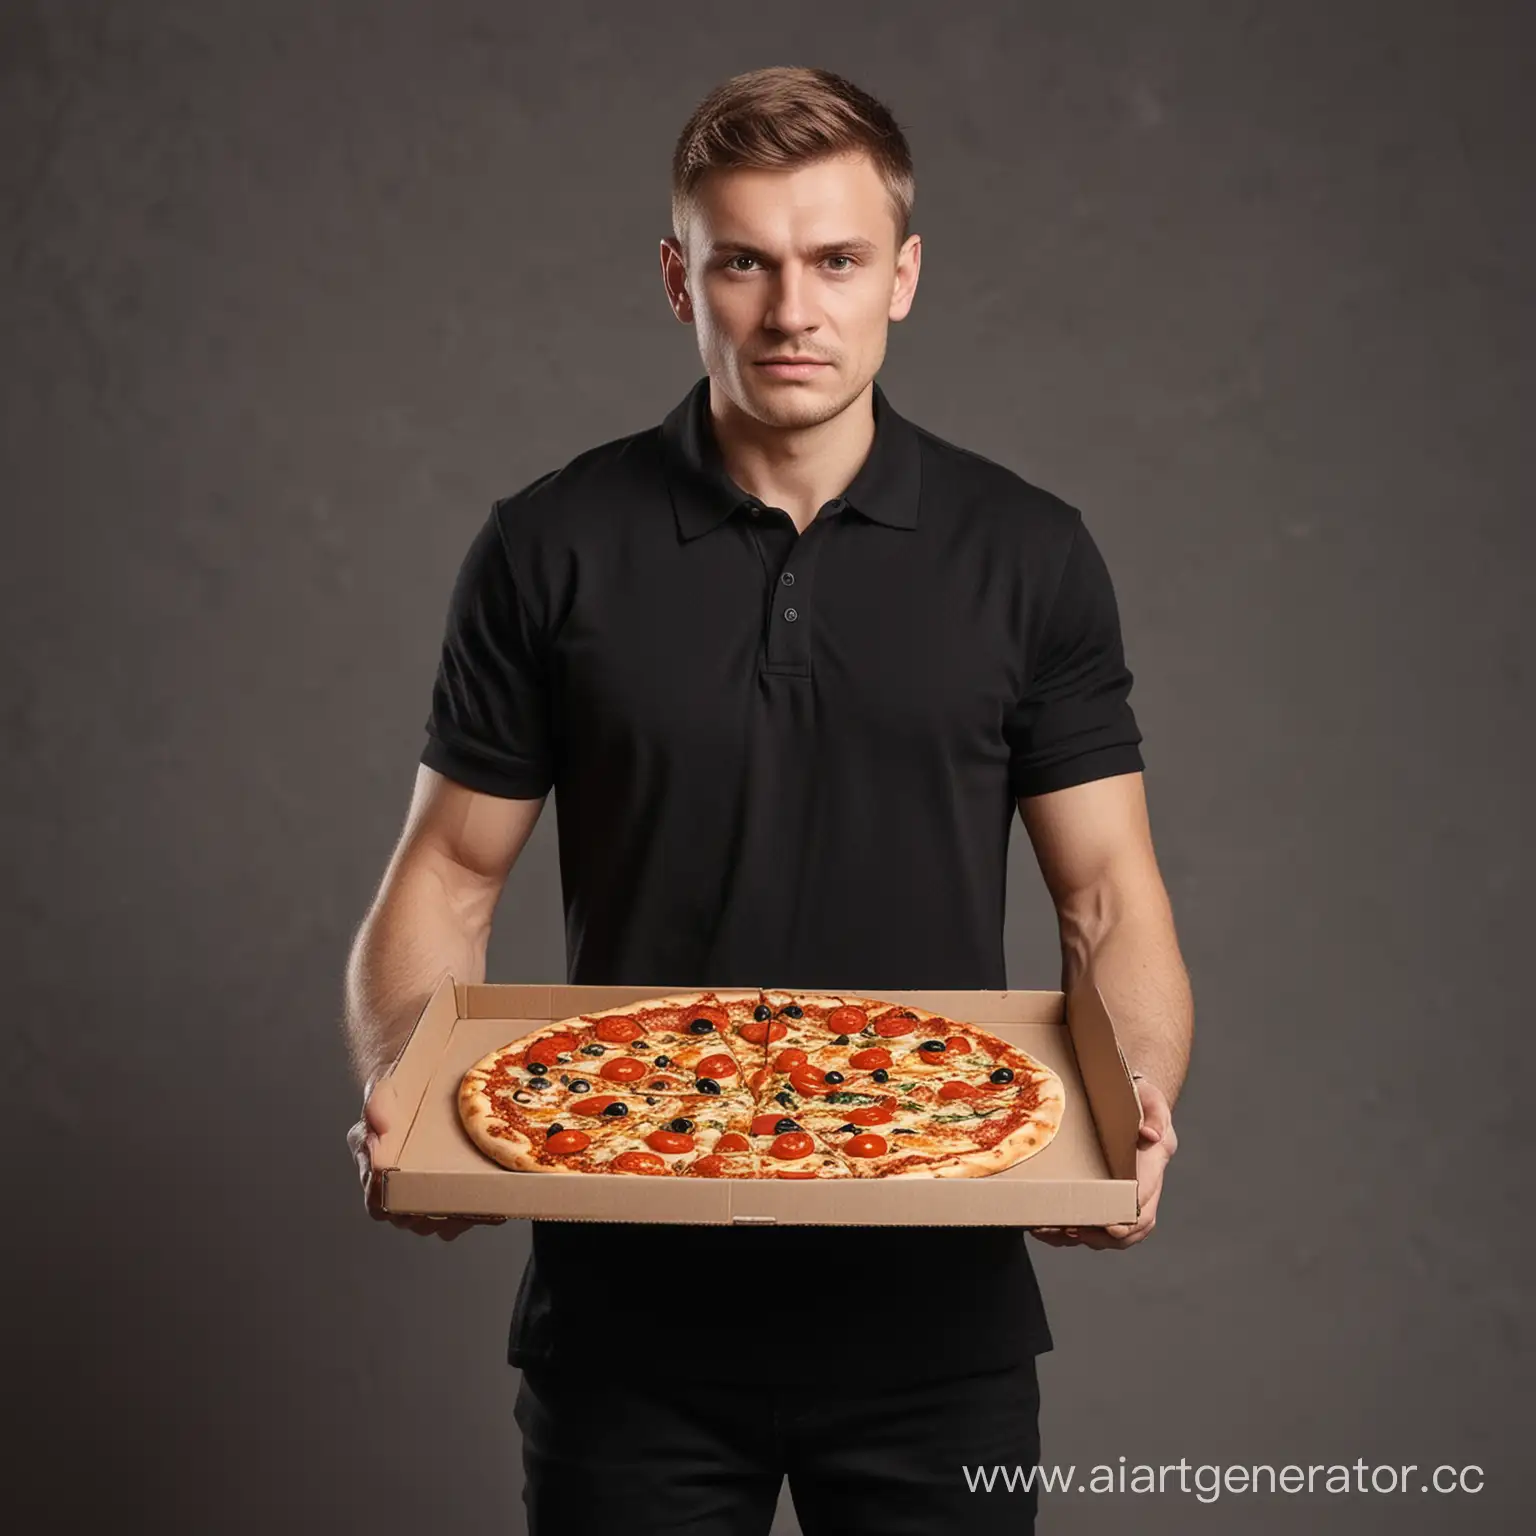 Russian-Man-Cooking-Pizza-in-Stylish-Black-Polo-Shirt